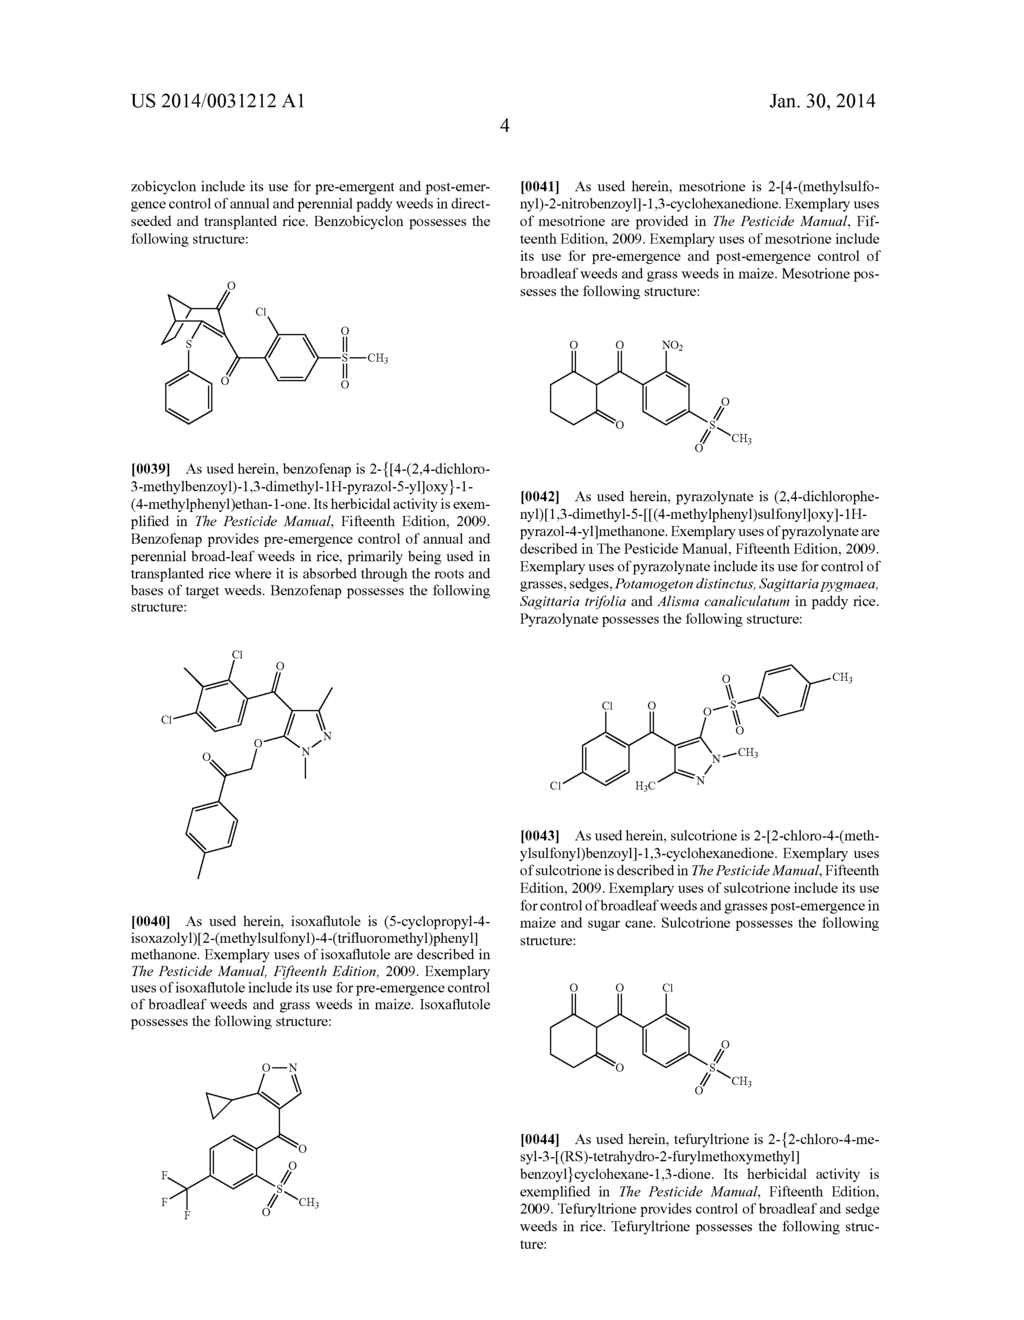 HERBICIDAL COMPOSITIONS COMPRISING     4-AMINO-3-CHLORO-5-FLUORO-6-(4-CHLORO-2-FLUORO-3-METHOXYPHENYL)     PYRIDINE-2-CARBOXYLIC ACID OR A DERIVATIVE THEREOF AND     4-HYDROXYPHENYL-PYRUVATE DIOXYGENASE (HPPD) INHIBITORS - diagram, schematic, and image 05